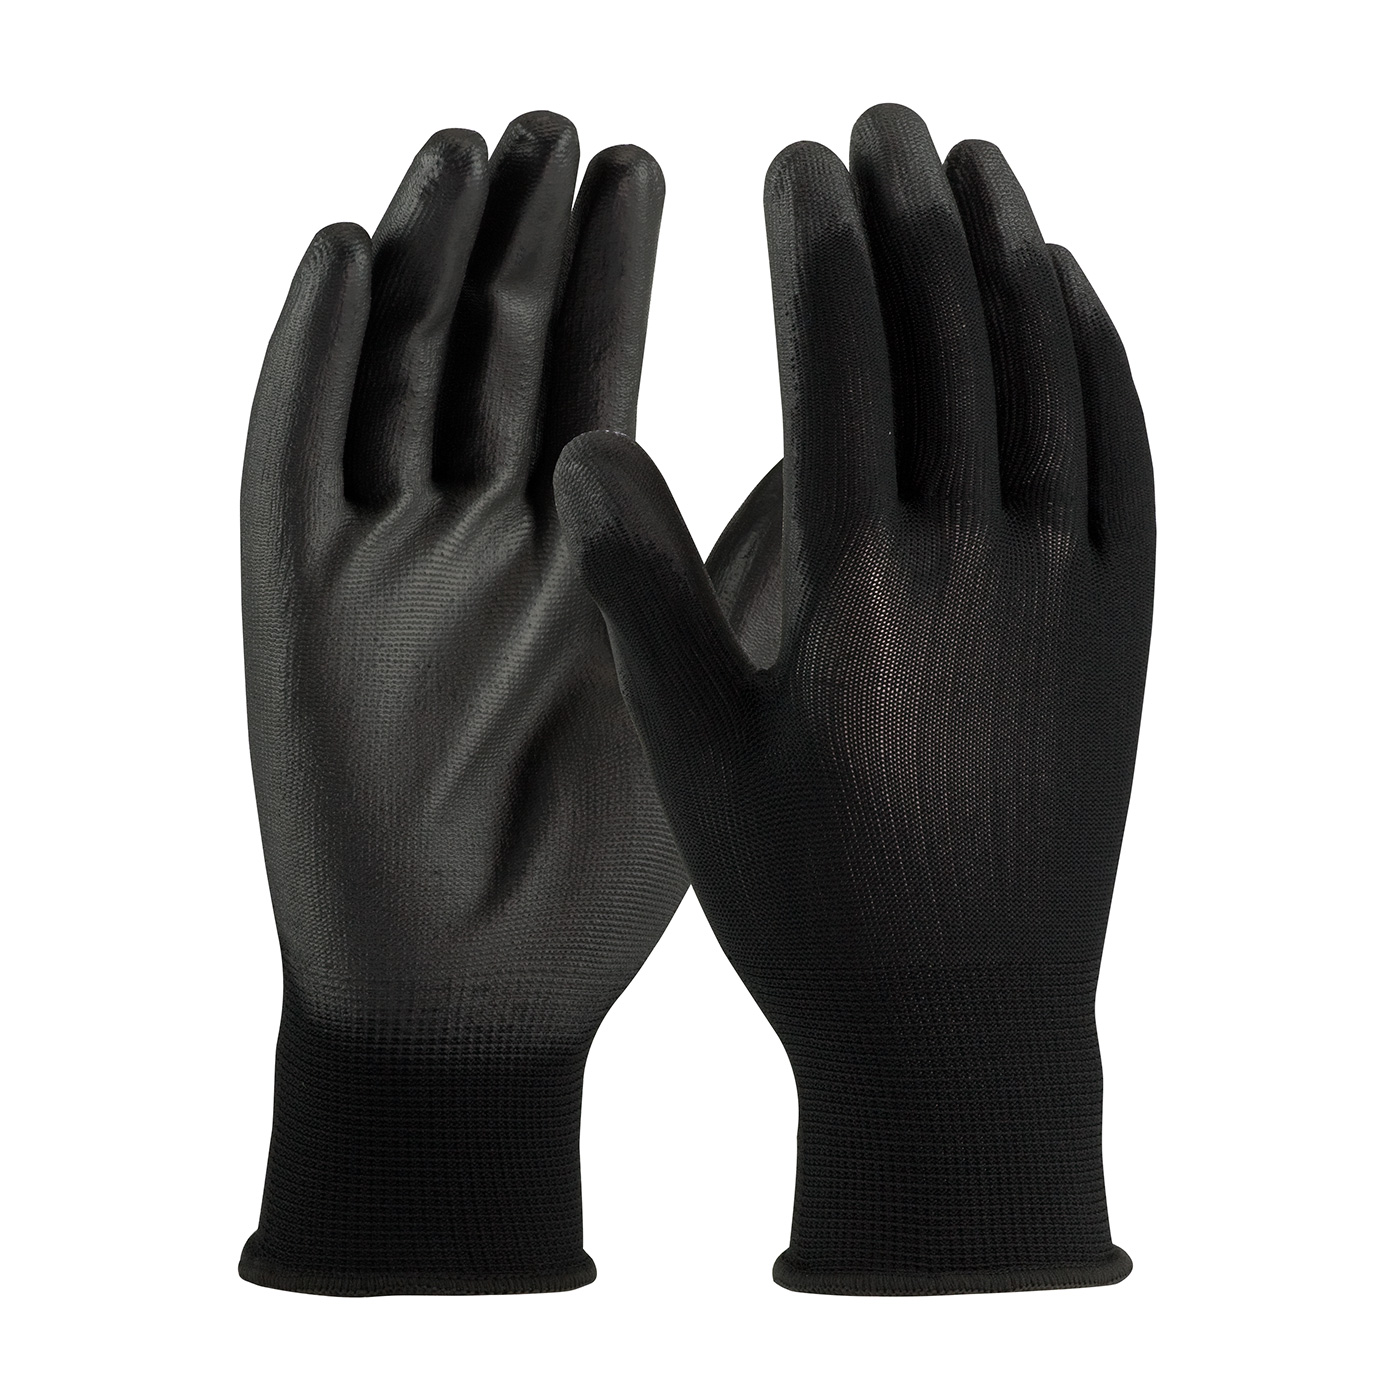 PIP® Seamless Knit Black Polyester Glove with Black Polyurethane Coated Smooth Grip on Palm & Fingers #33-B115